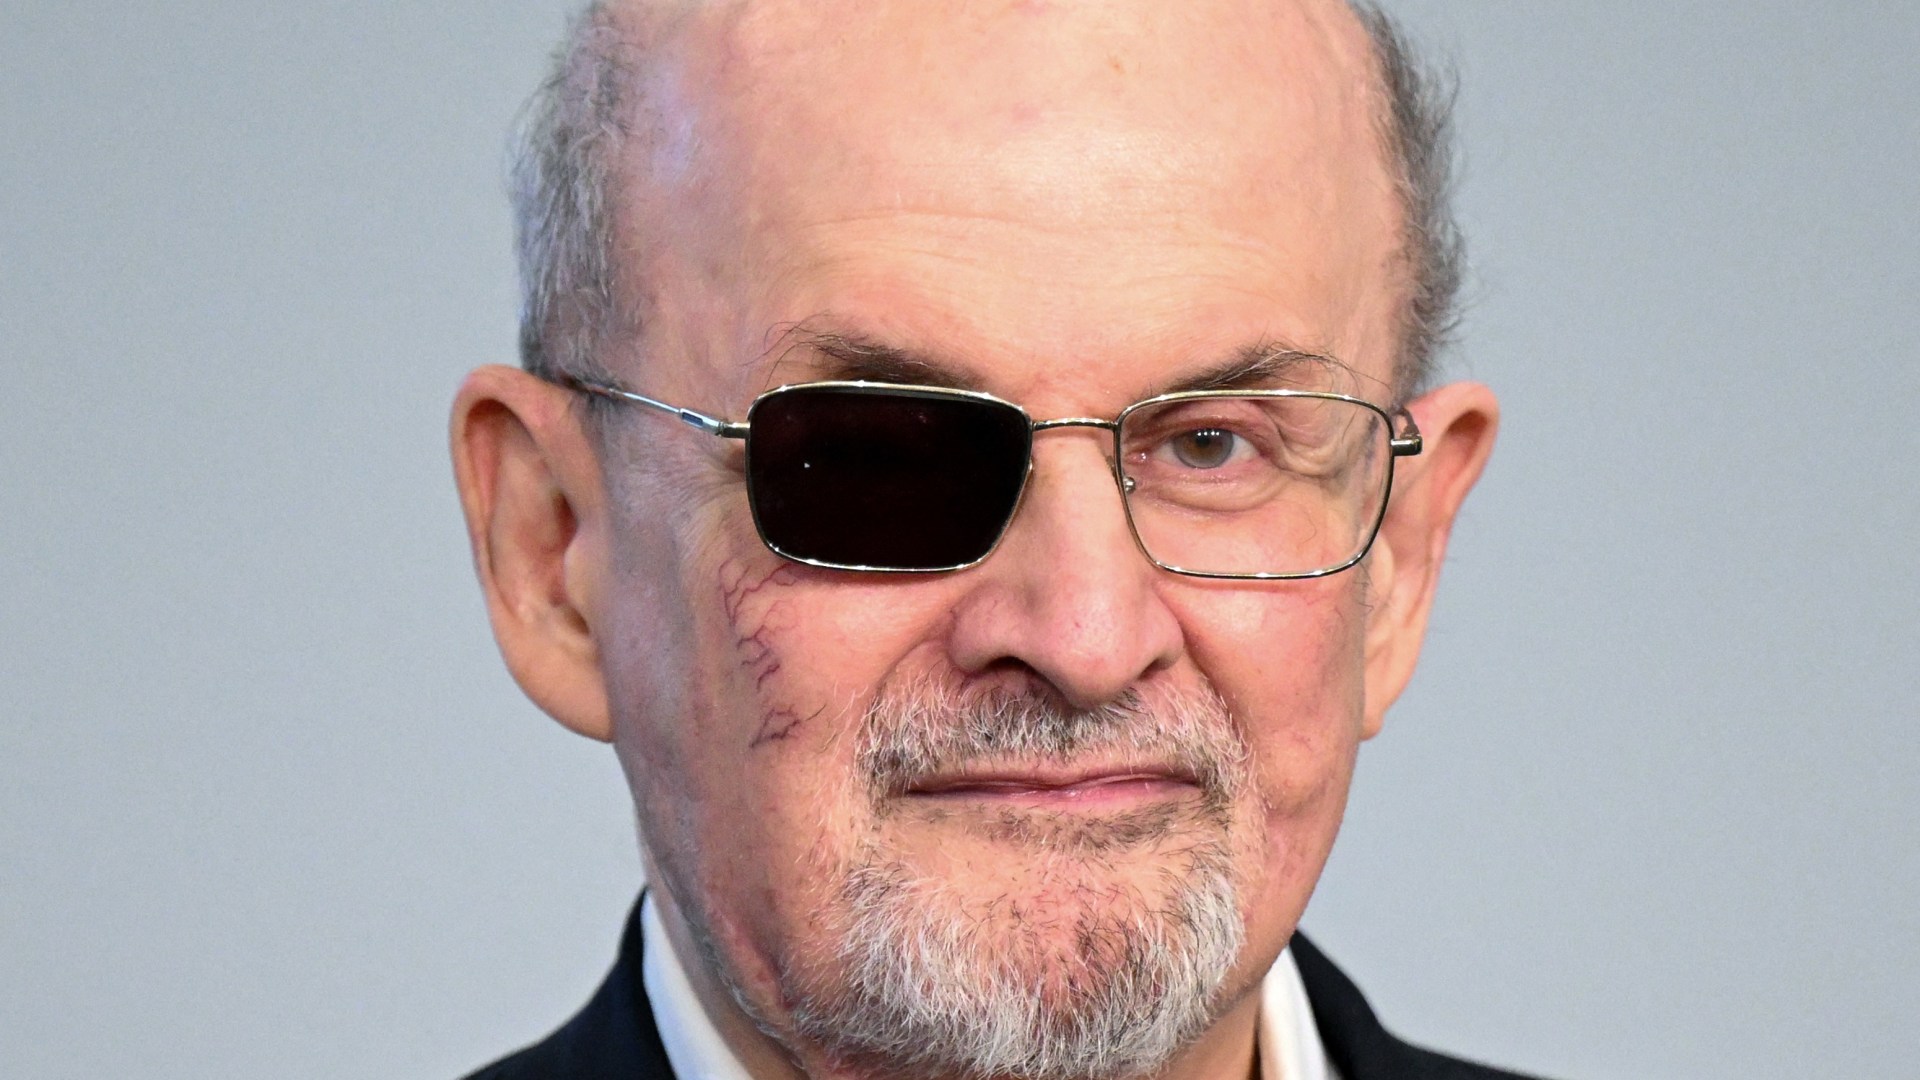 Salman Rushdie slams ‘dumb clown’ assailant in shocking interview about 2022 attack